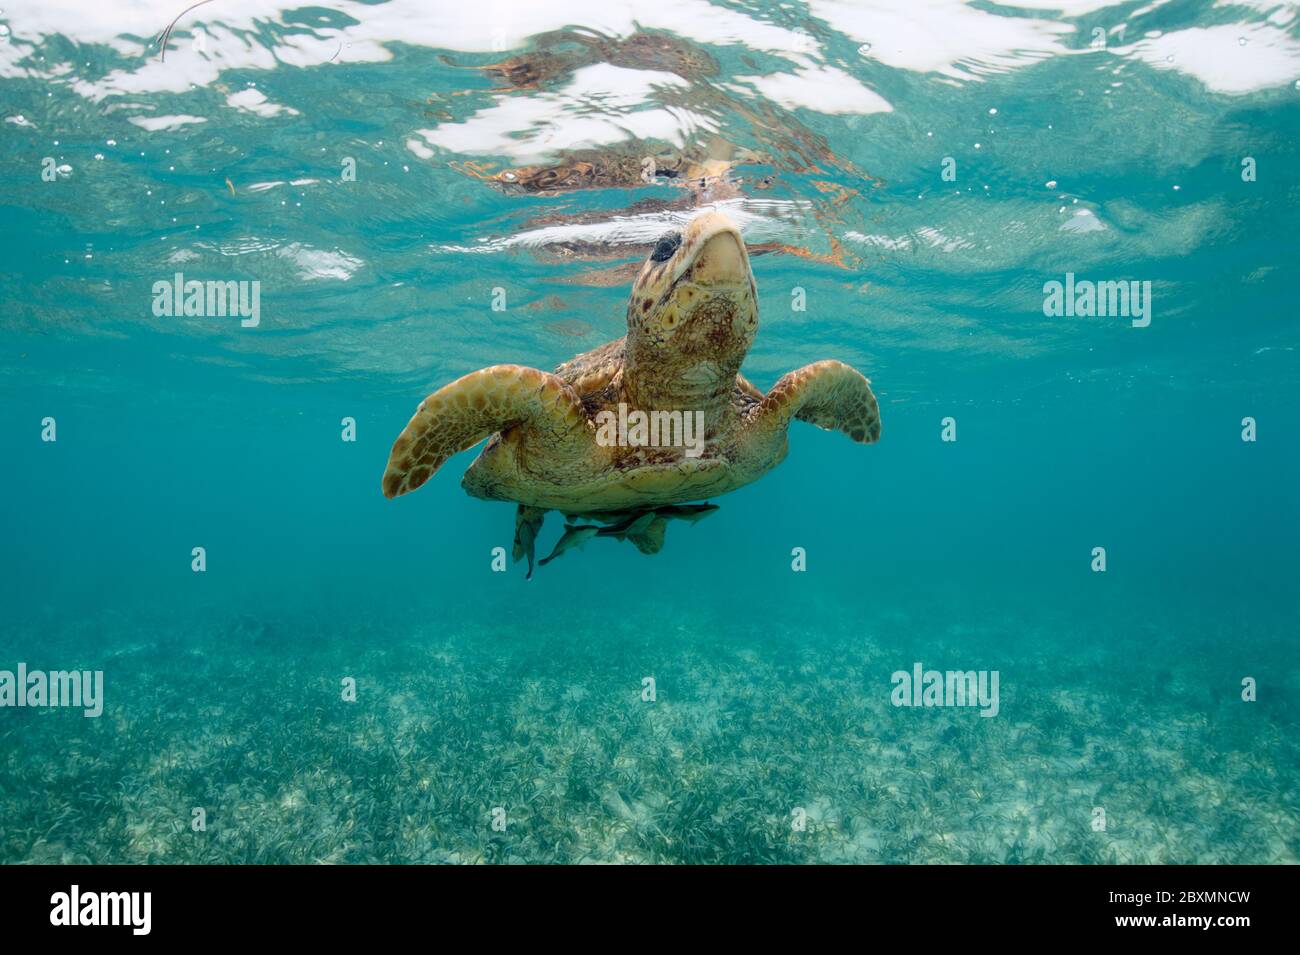 Loggerhead seaturtle is taking a breath from underwater at the Belize Barrier Reef Stock Photo